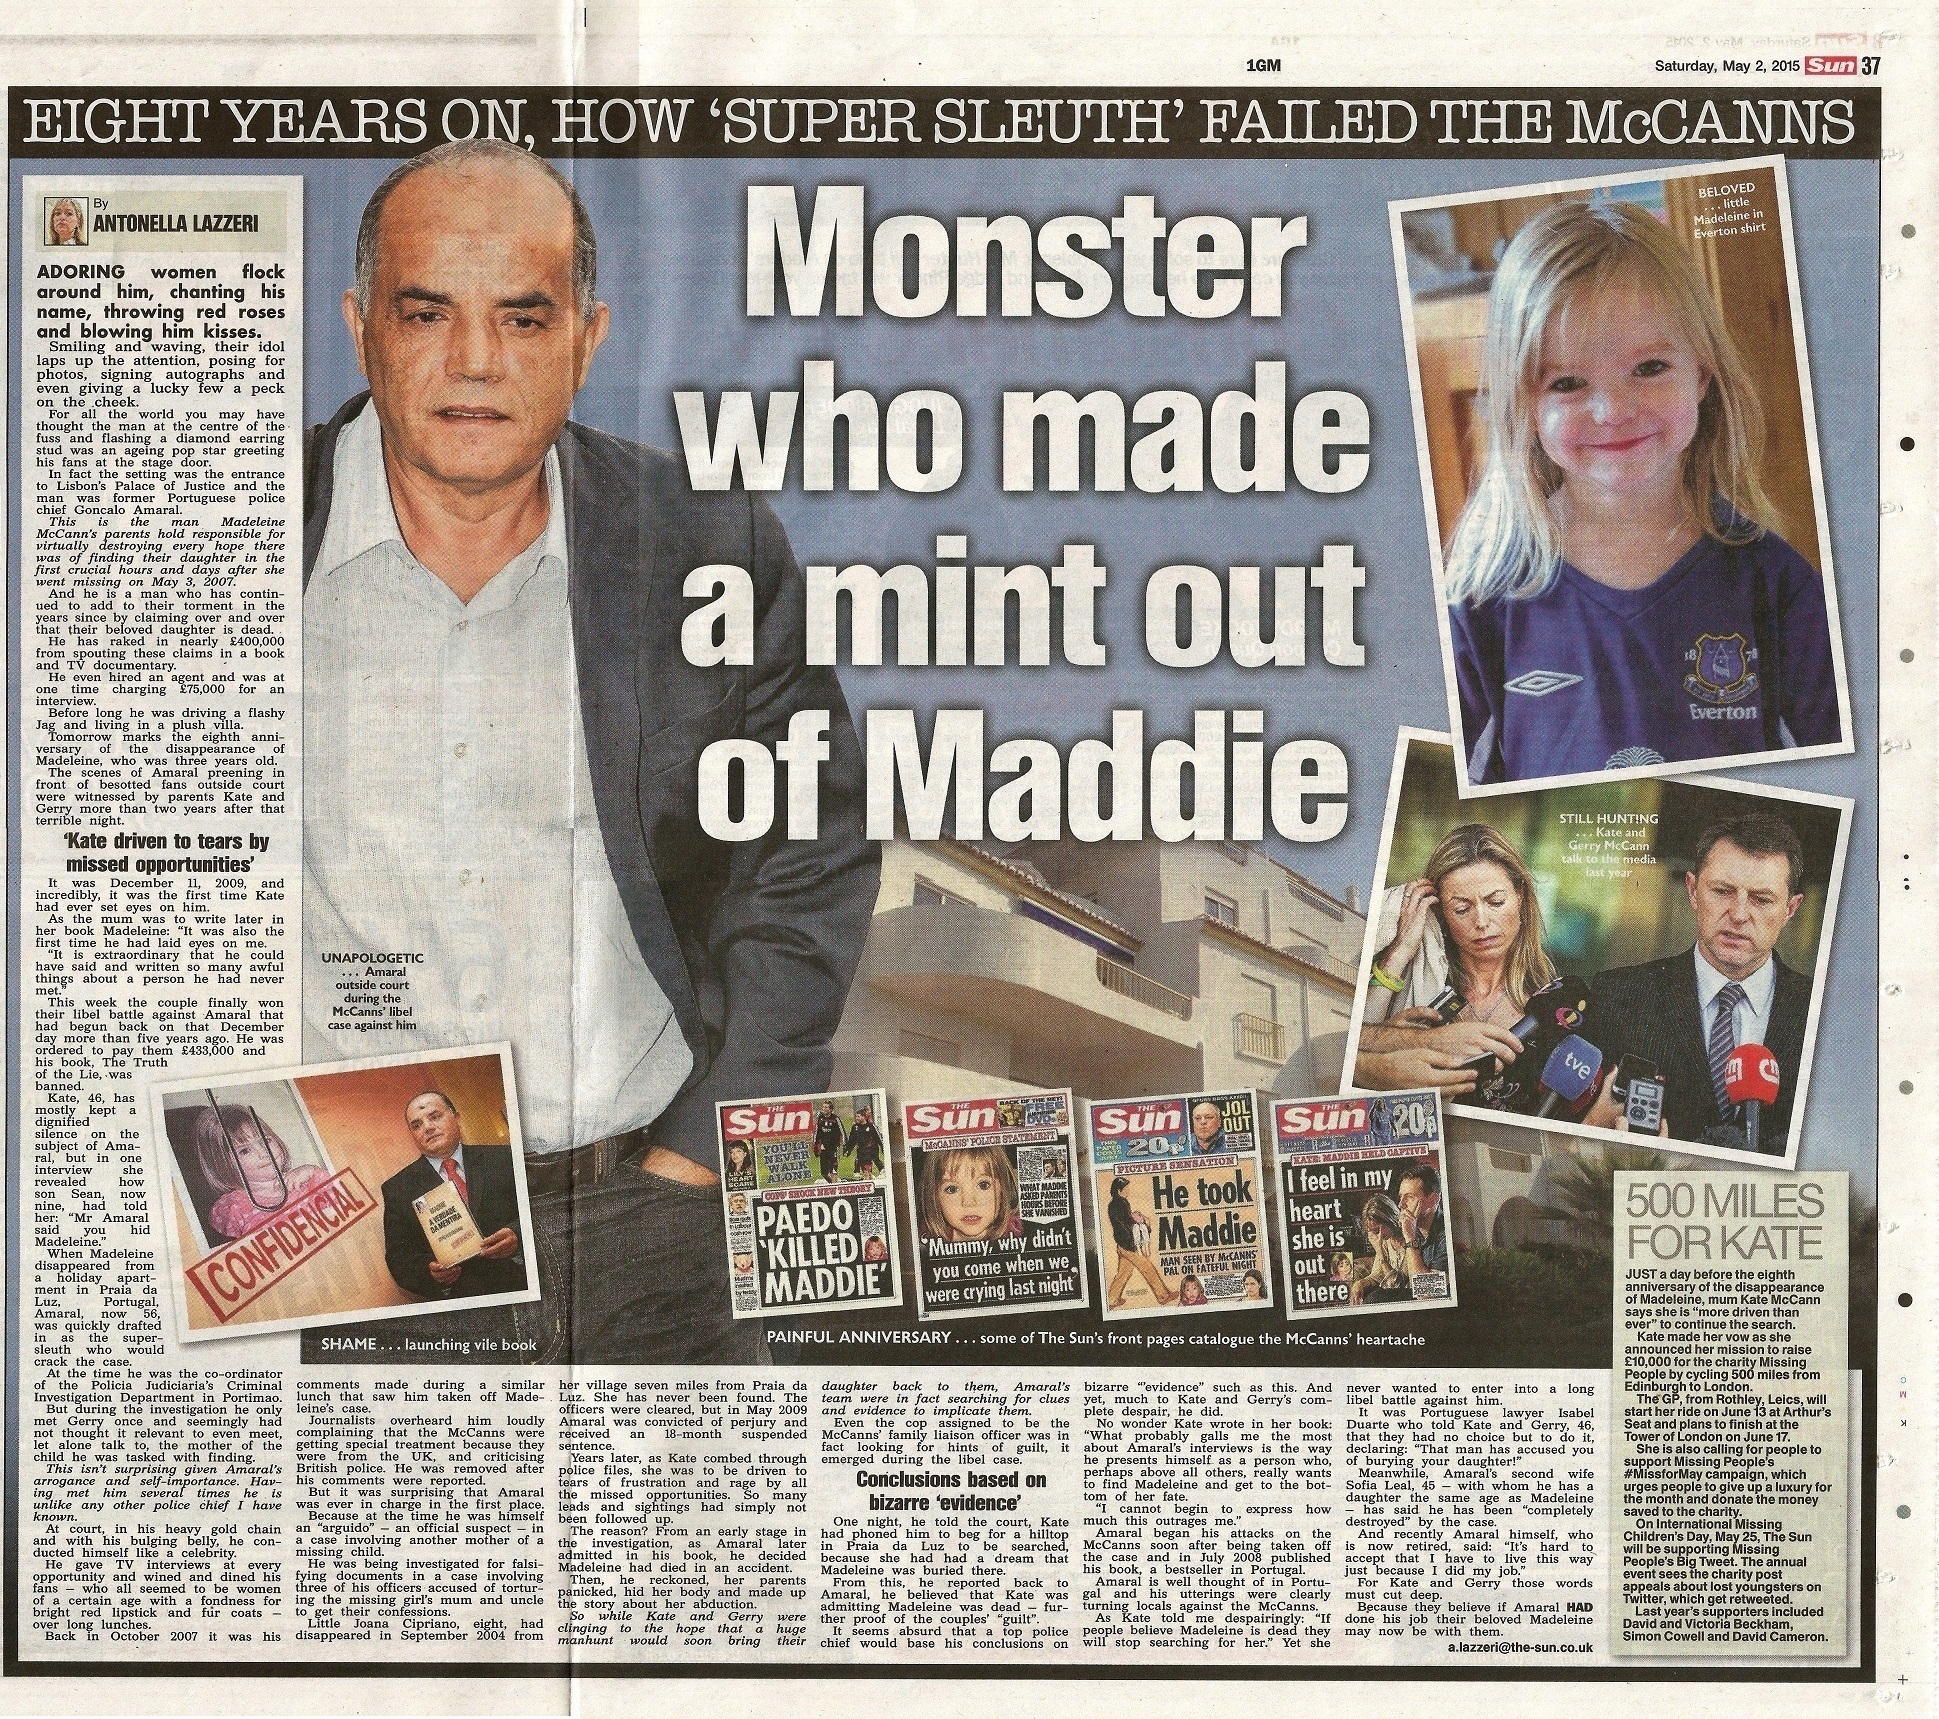 Monster who made a mint out of Maddie - The Sun (paper edition, pages 36&37)